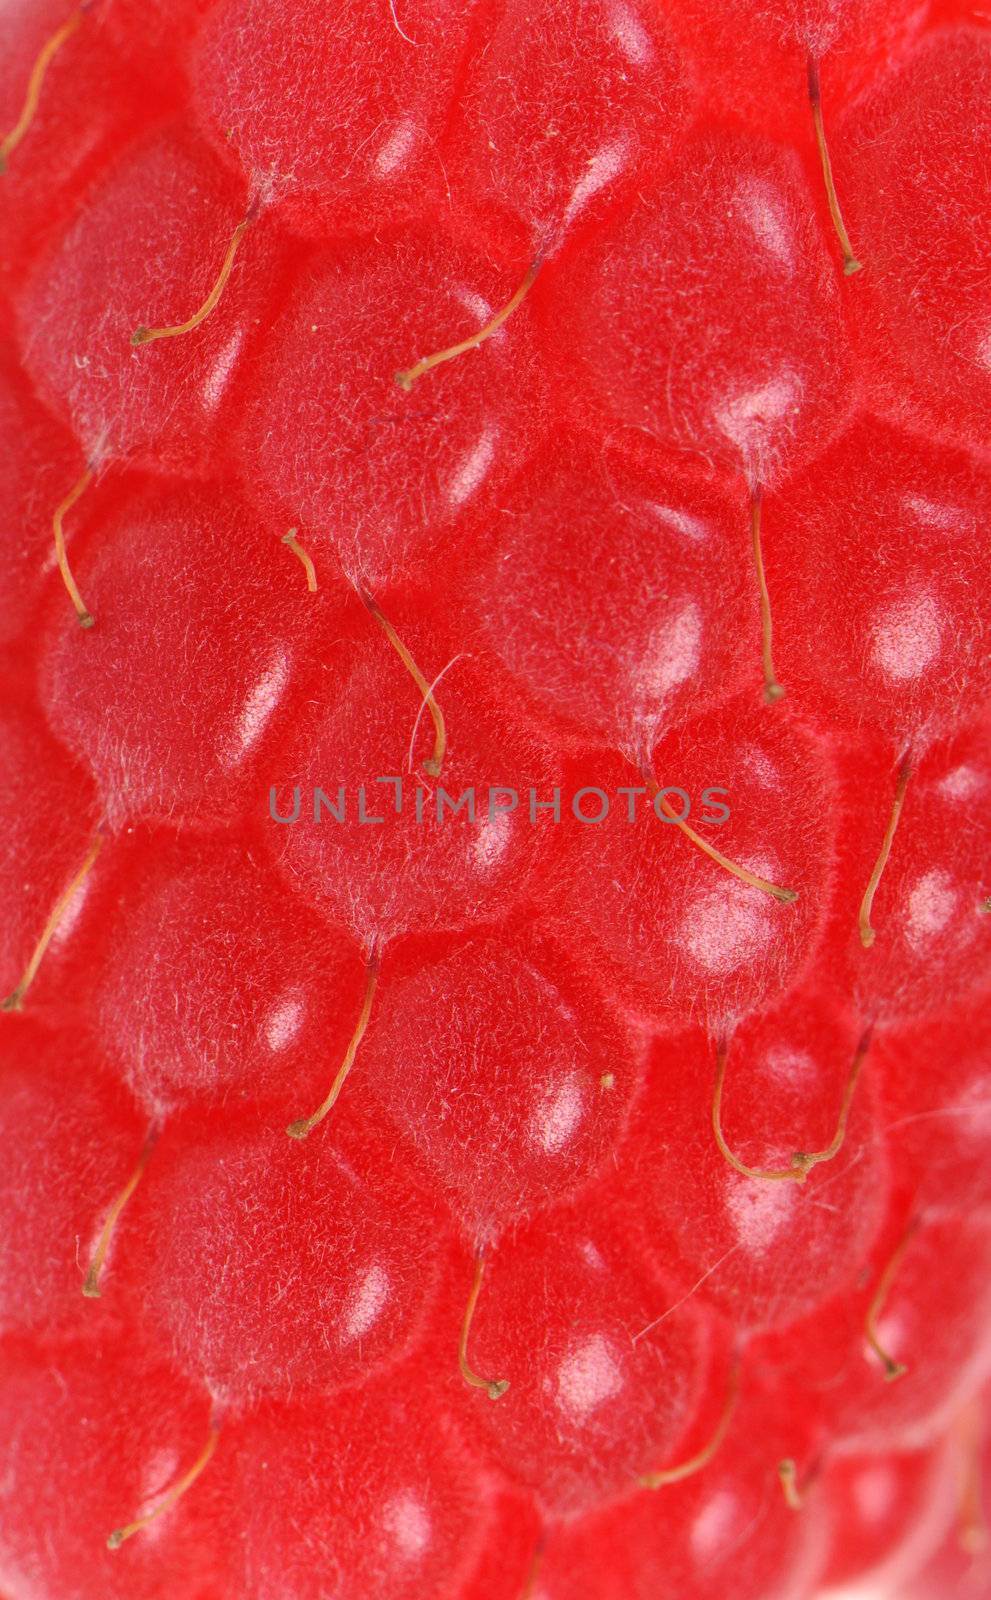 Fresh raspberry in extreme close-up